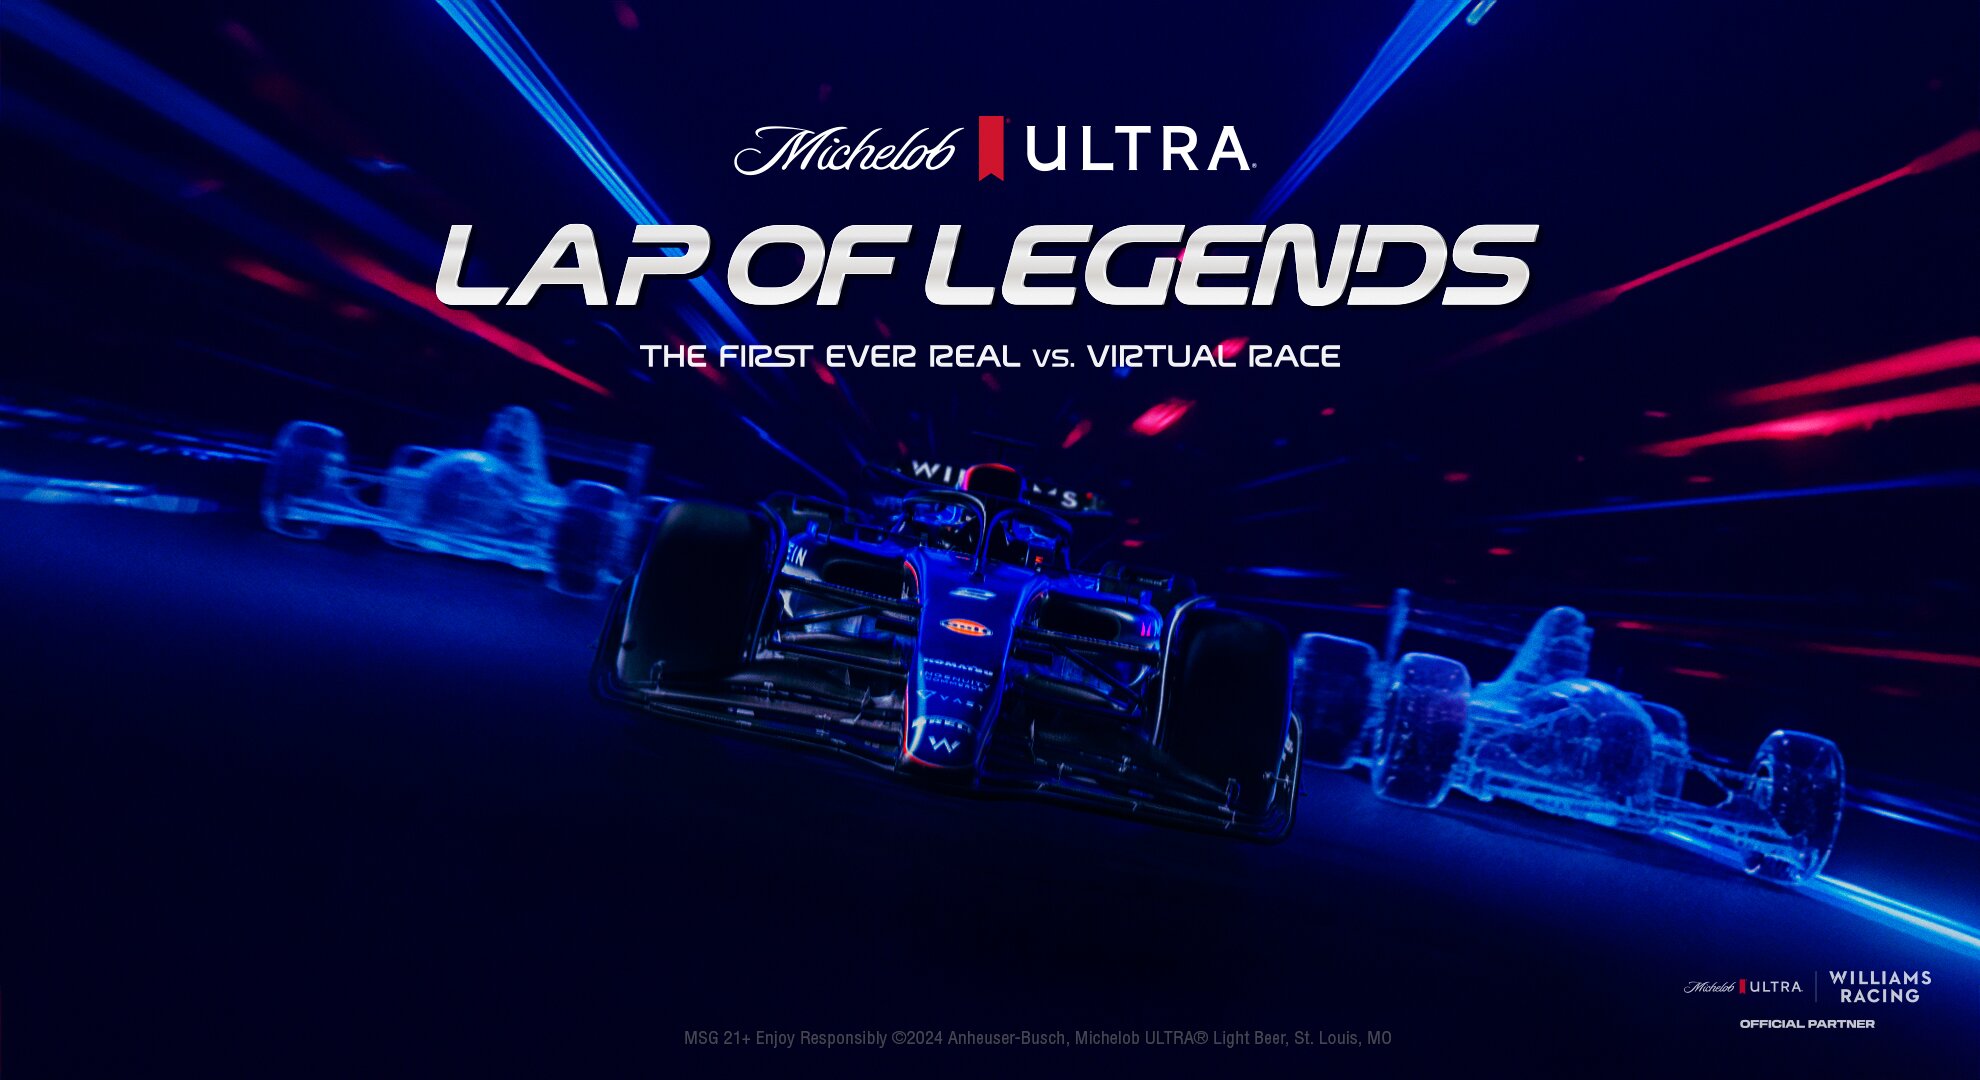 Michelob ULTRA Presents “Lap of Legends” – the First-Ever Real vs. Virtual Race Debuting in New One-Of-A-Kind Television Special